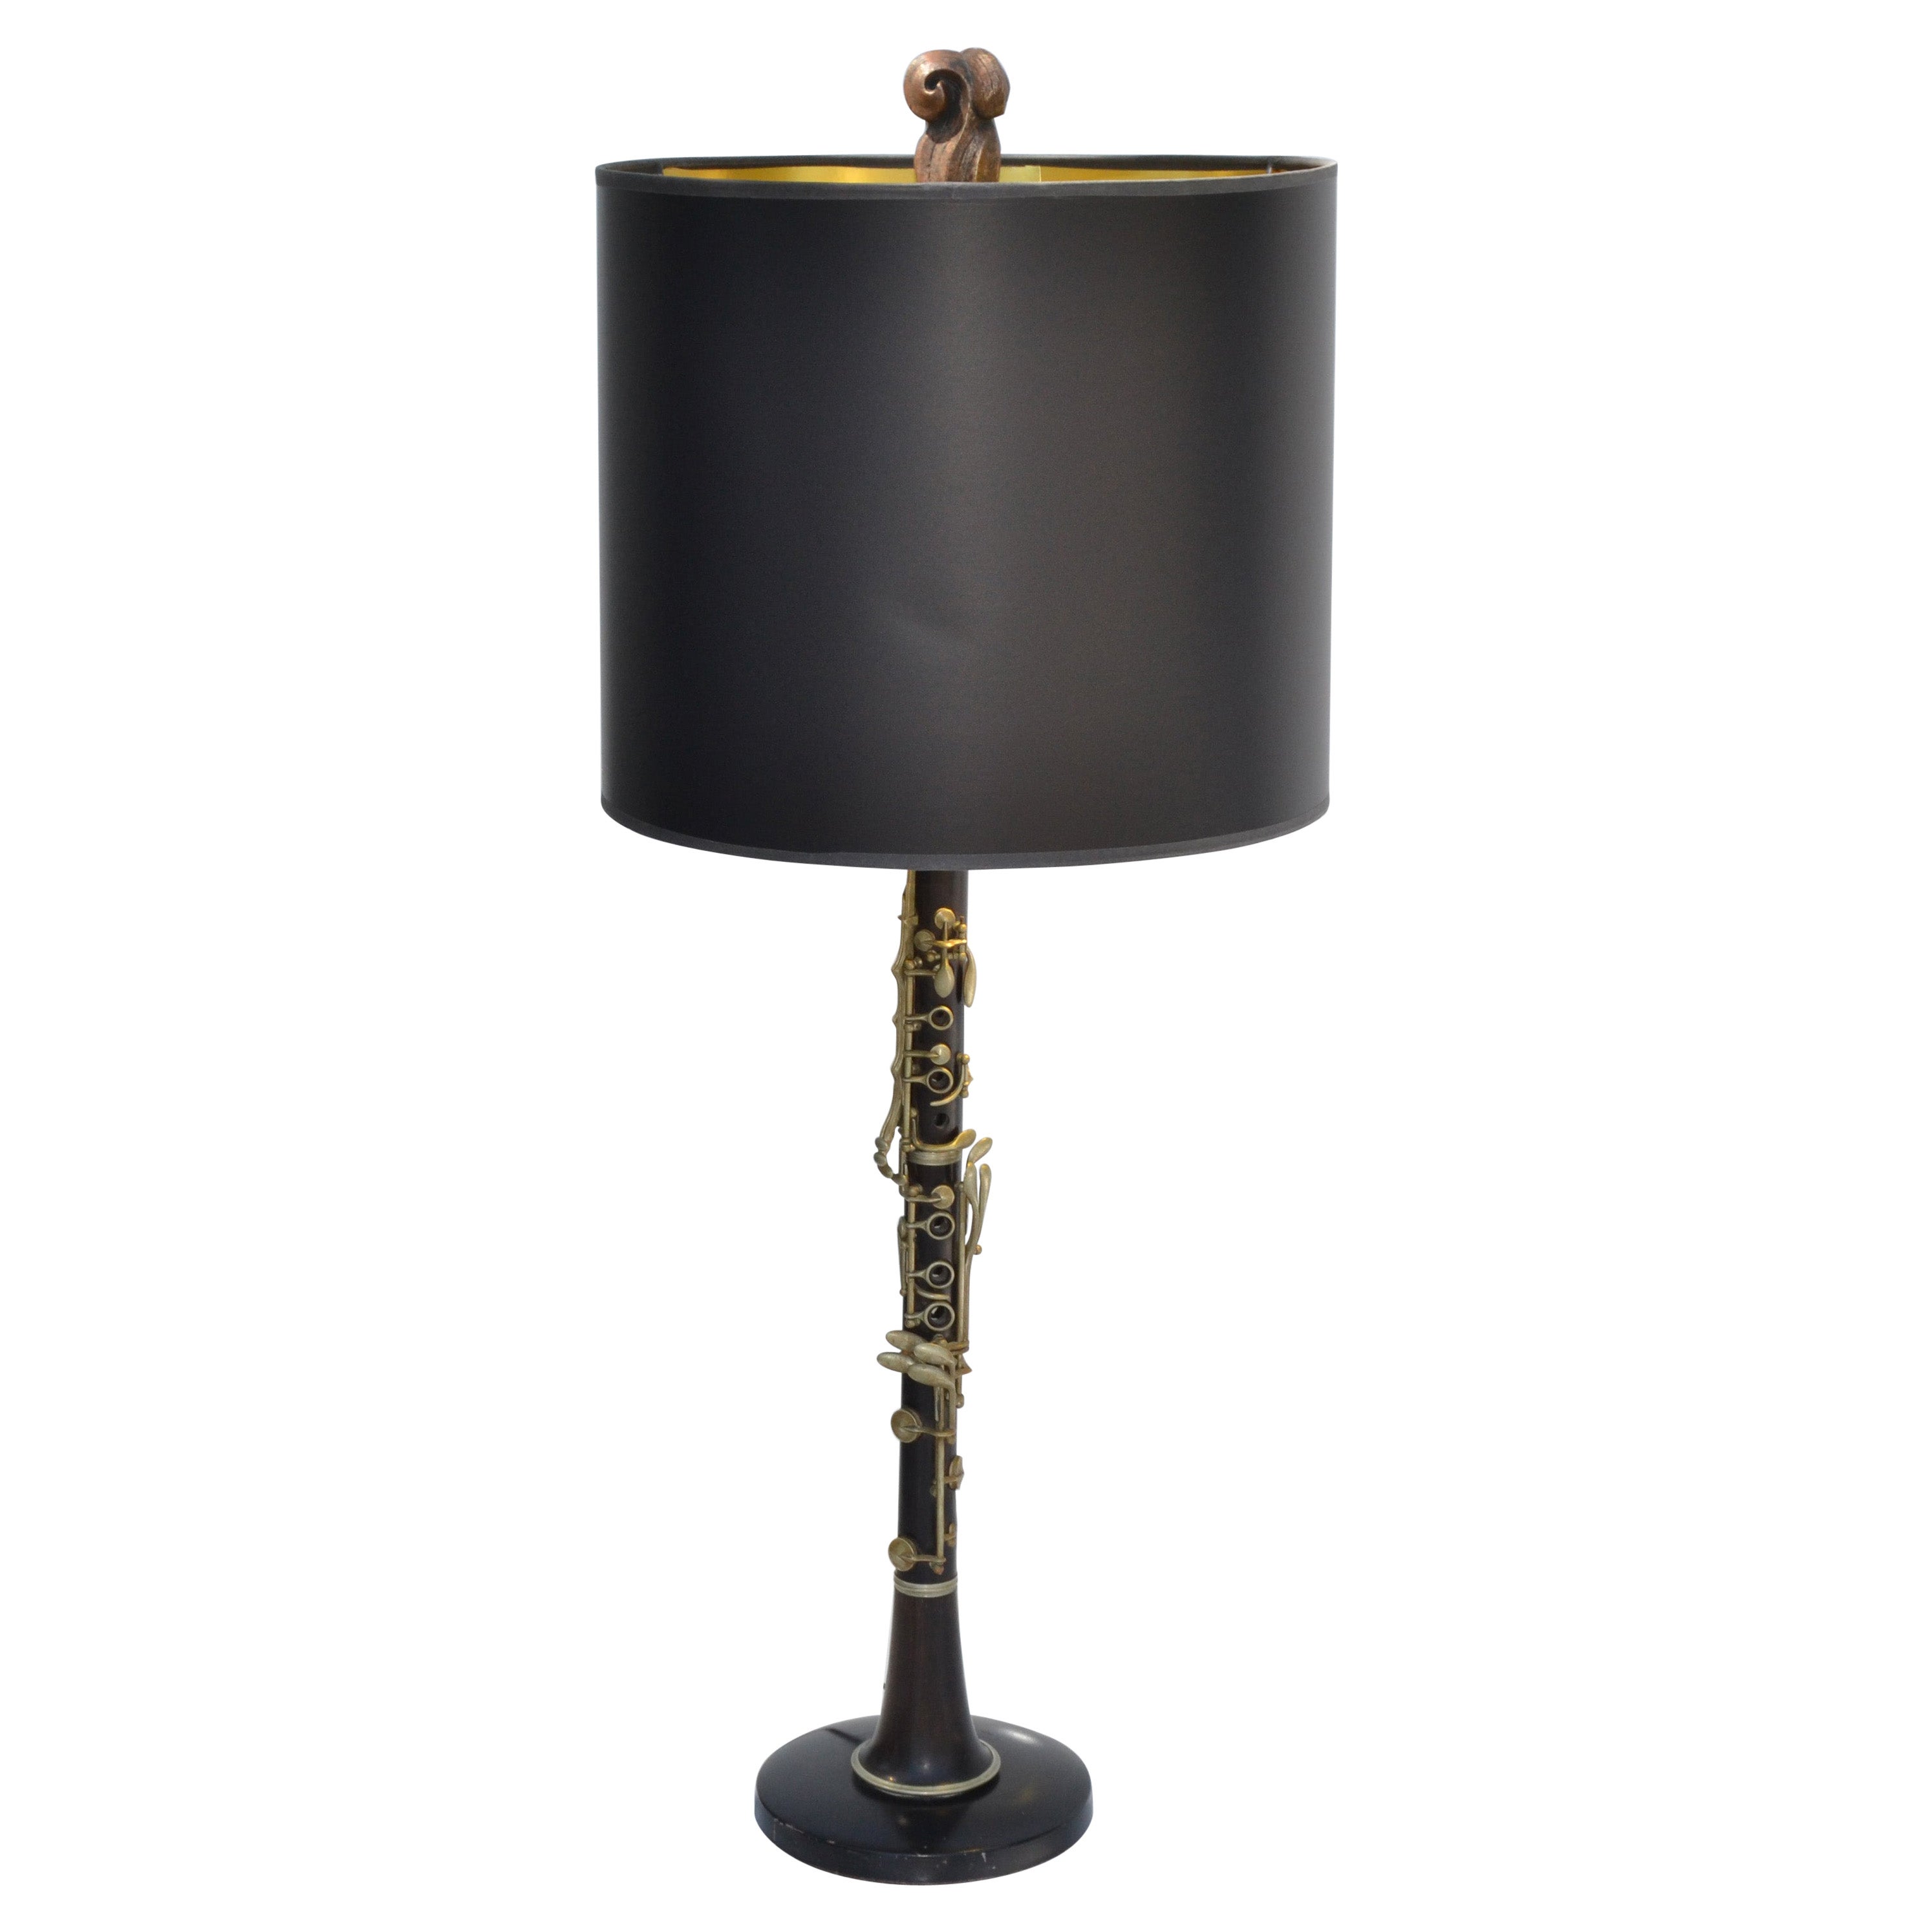 French Neoclassical Clarinet Wood Brass & Metal Table Lamp Black Gold Drum Shade For Sale